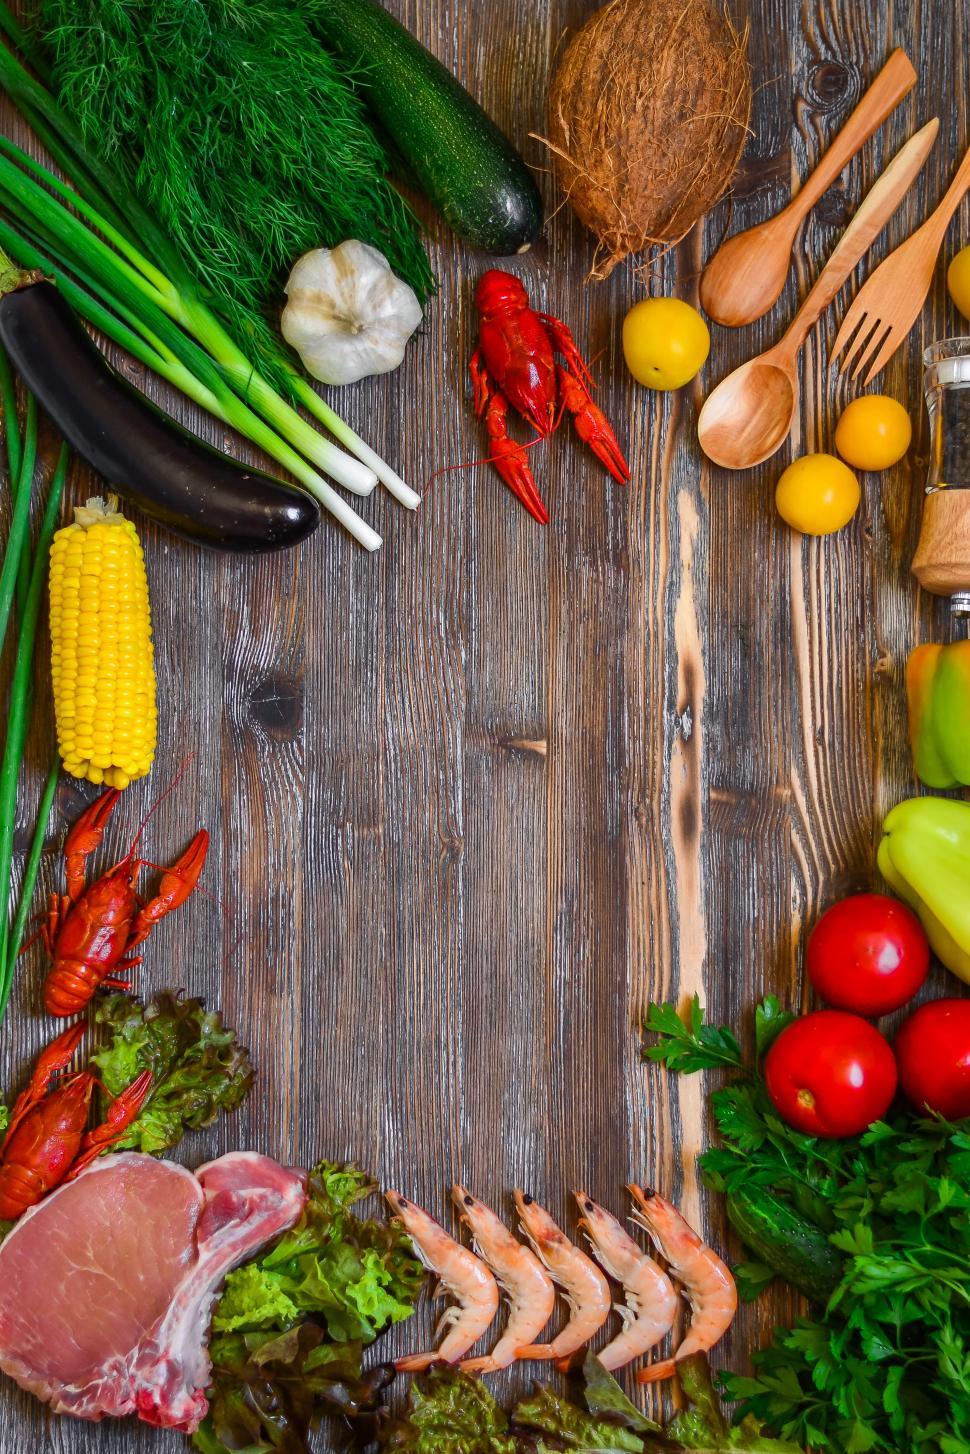 Free Image of Vegetables and seafood arranged on a hardwood board 